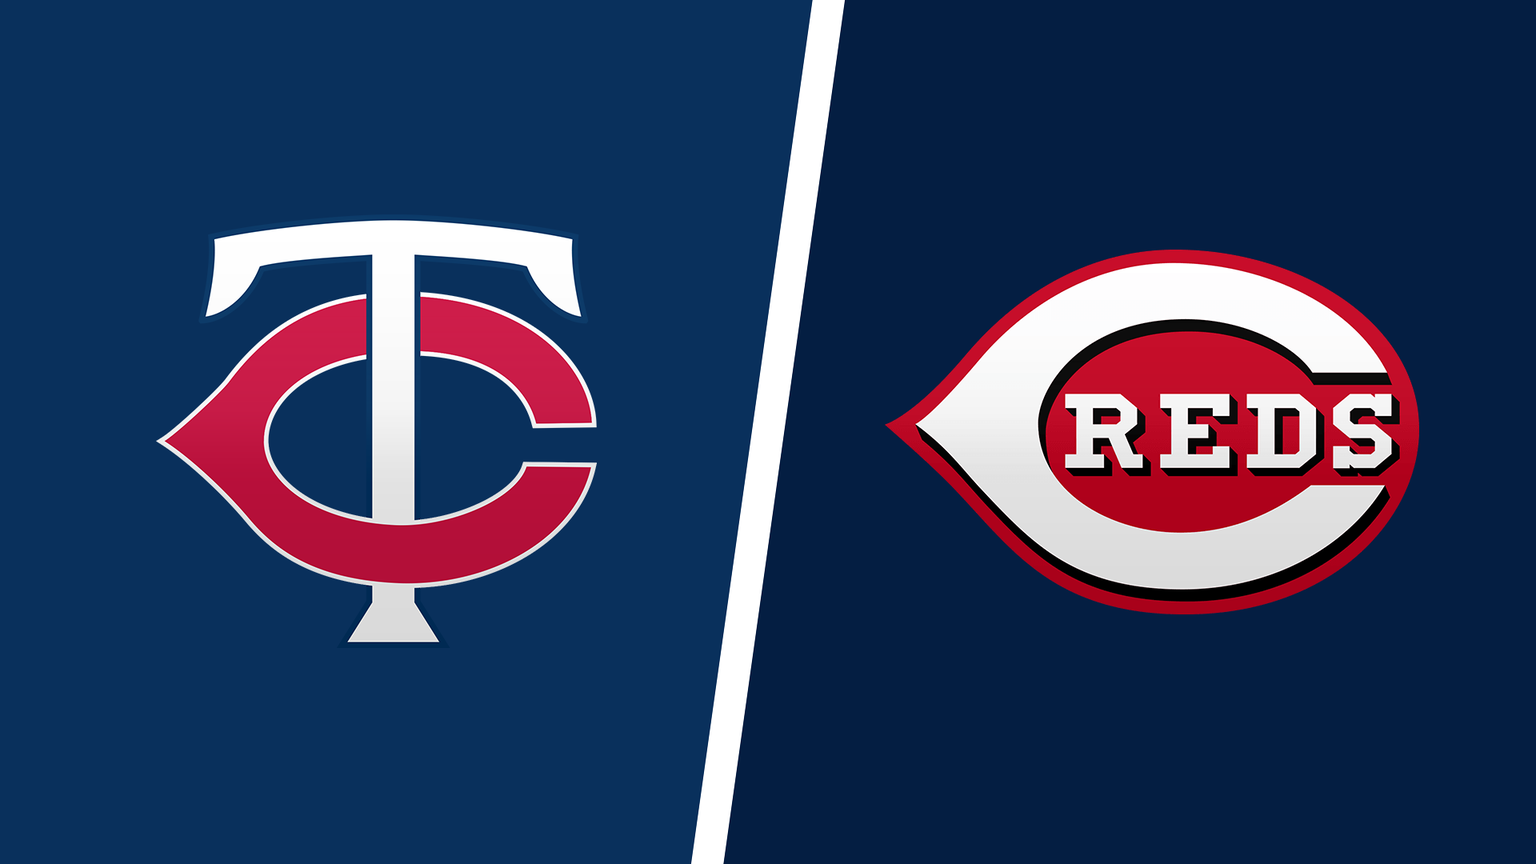 How to Watch Cincinnati Reds vs. Minnesota Twins Live Online Without